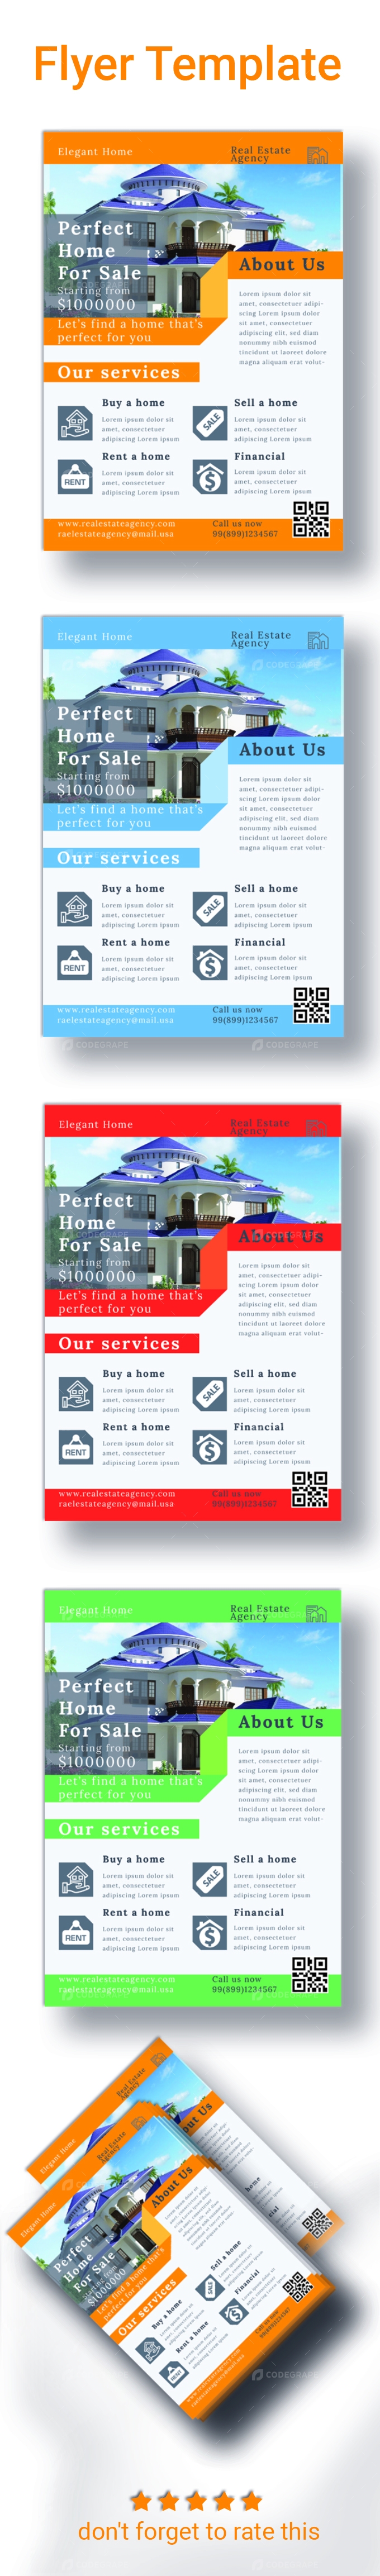 Flyer Template real estate